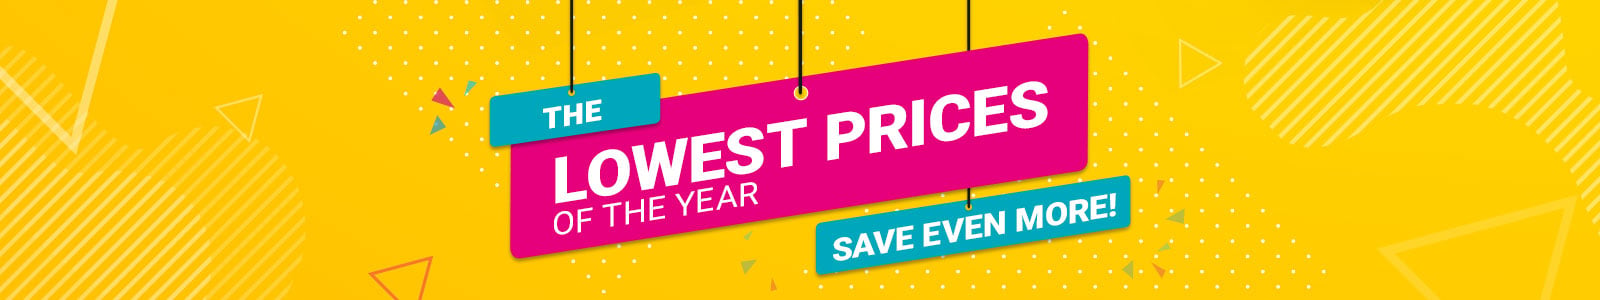 The Lowest Prices of the Year
Save Even More! 
Shop Now